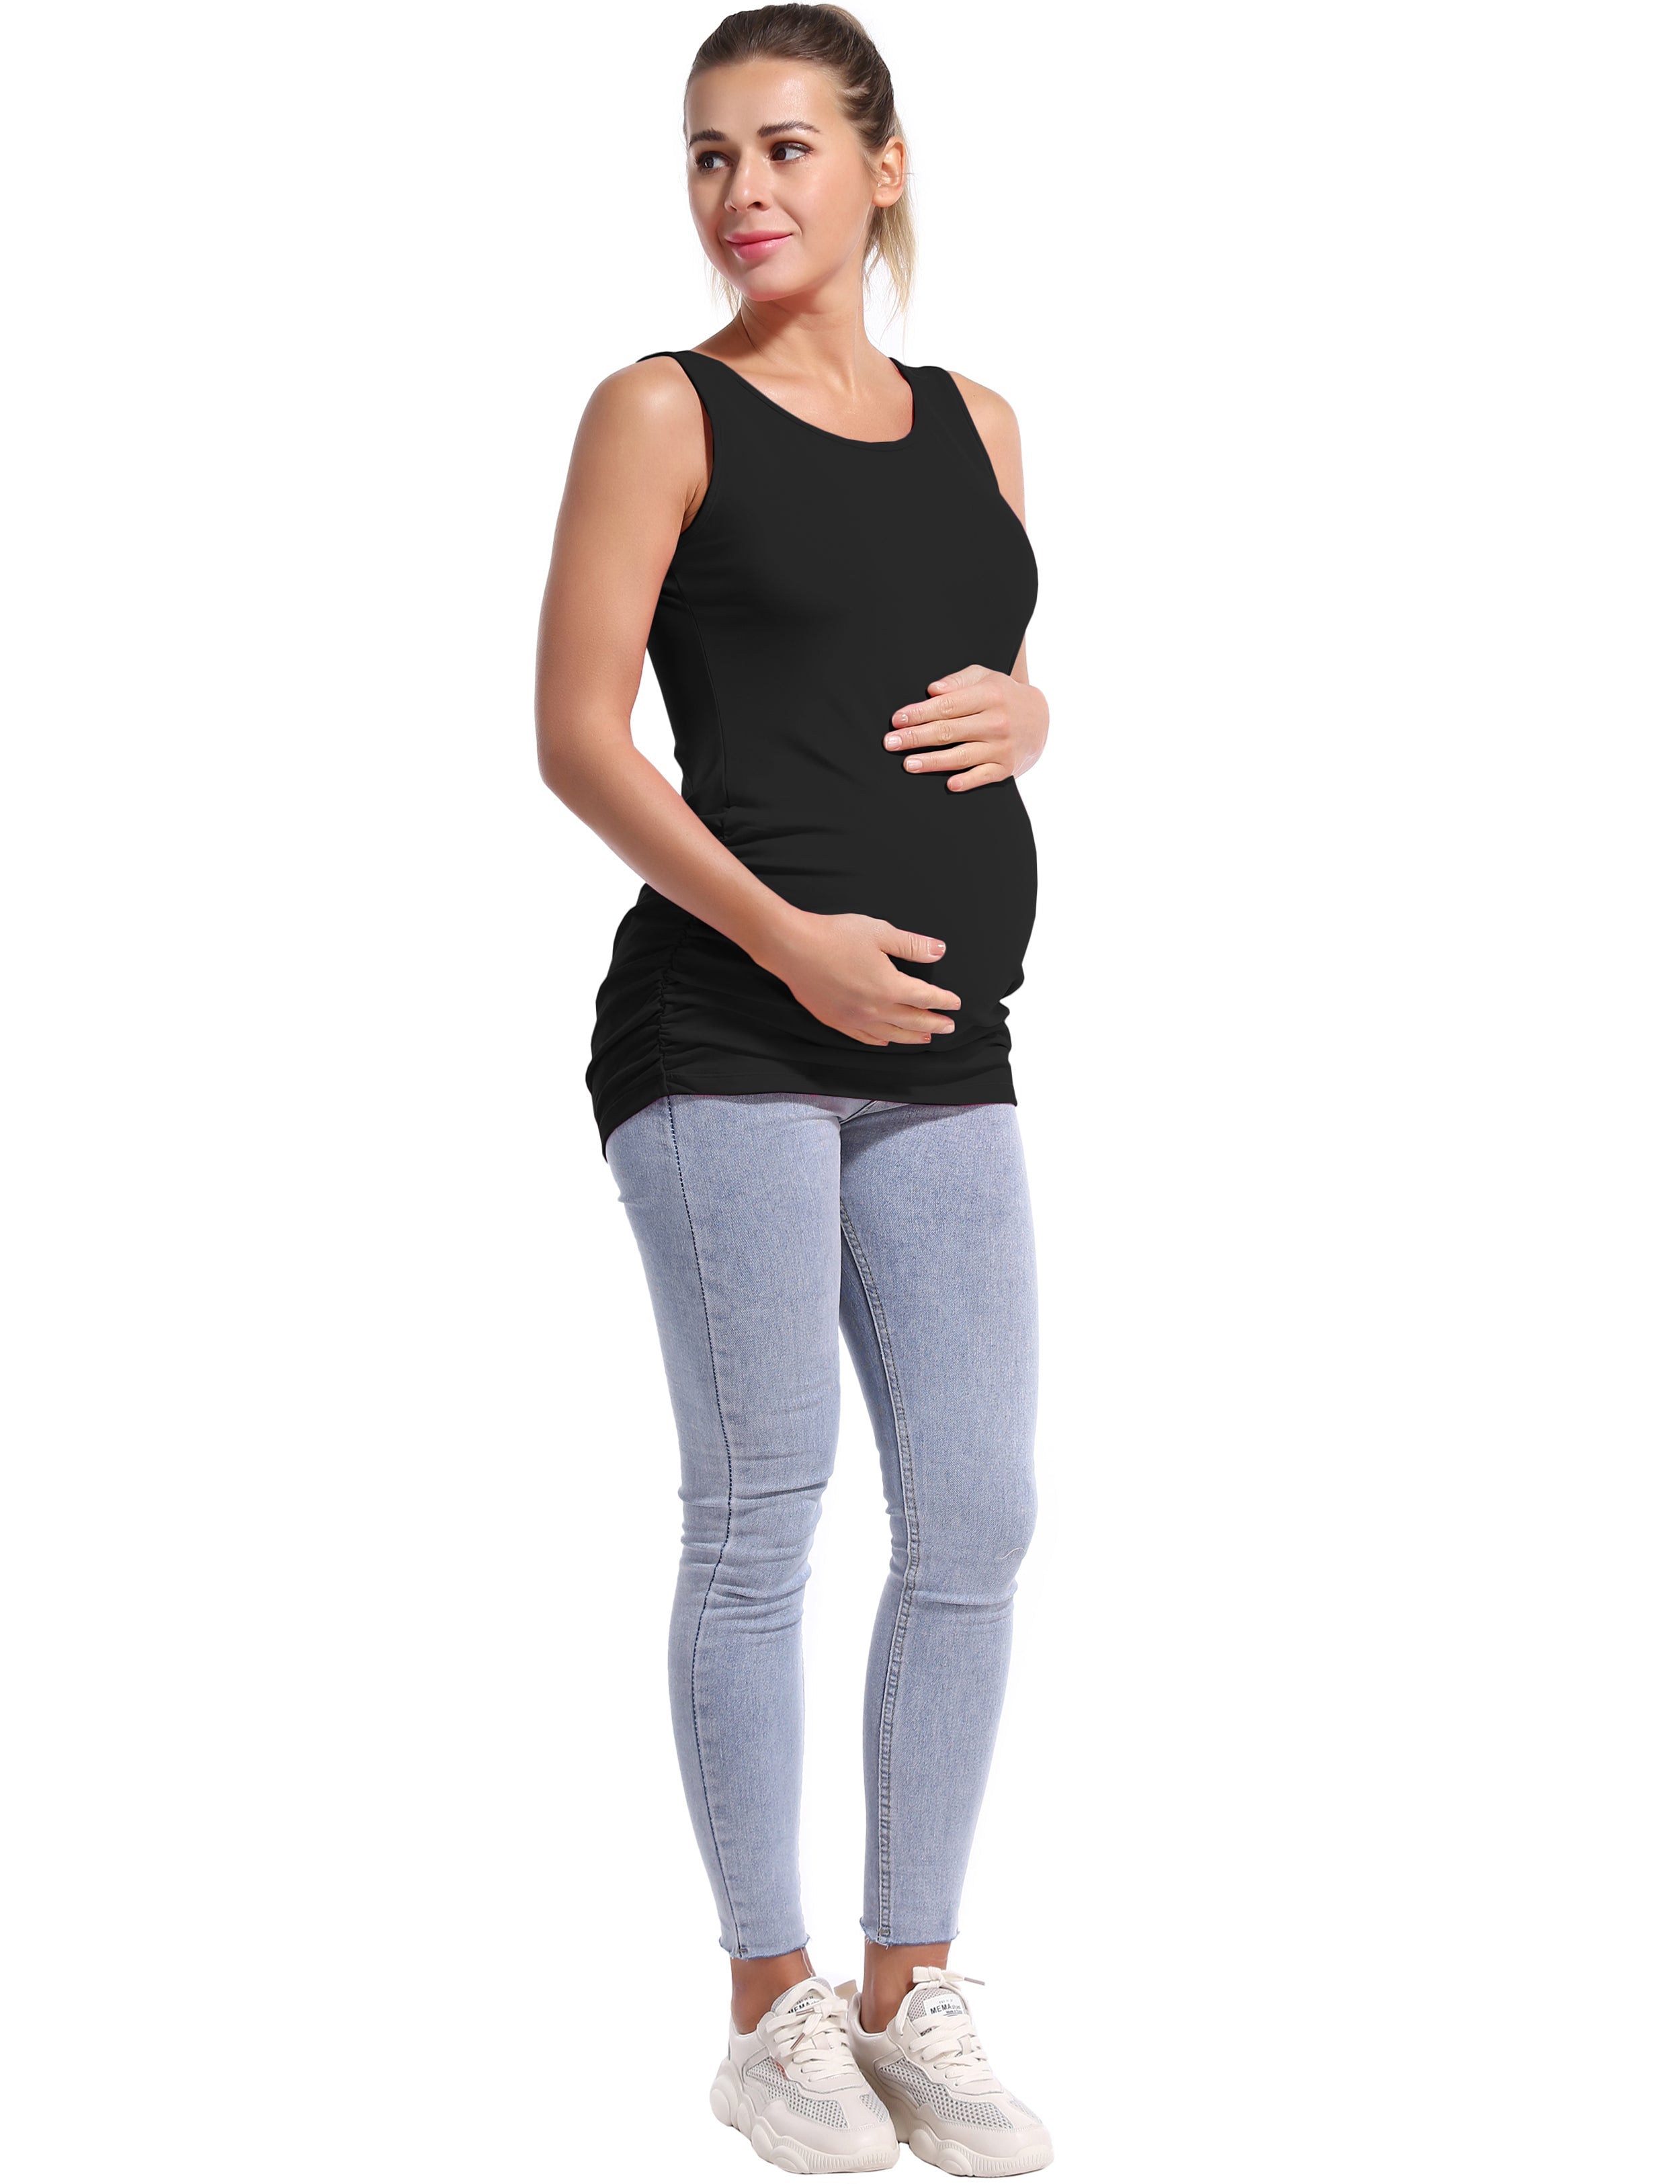 Maternity Side Shirred Tank Top black 92%Nylon/8%Spandex(Cotton Soft) Designed for Maternity So buttery soft, it feels weightless Sweat-wicking Four-way stretch Breathable Contours your body